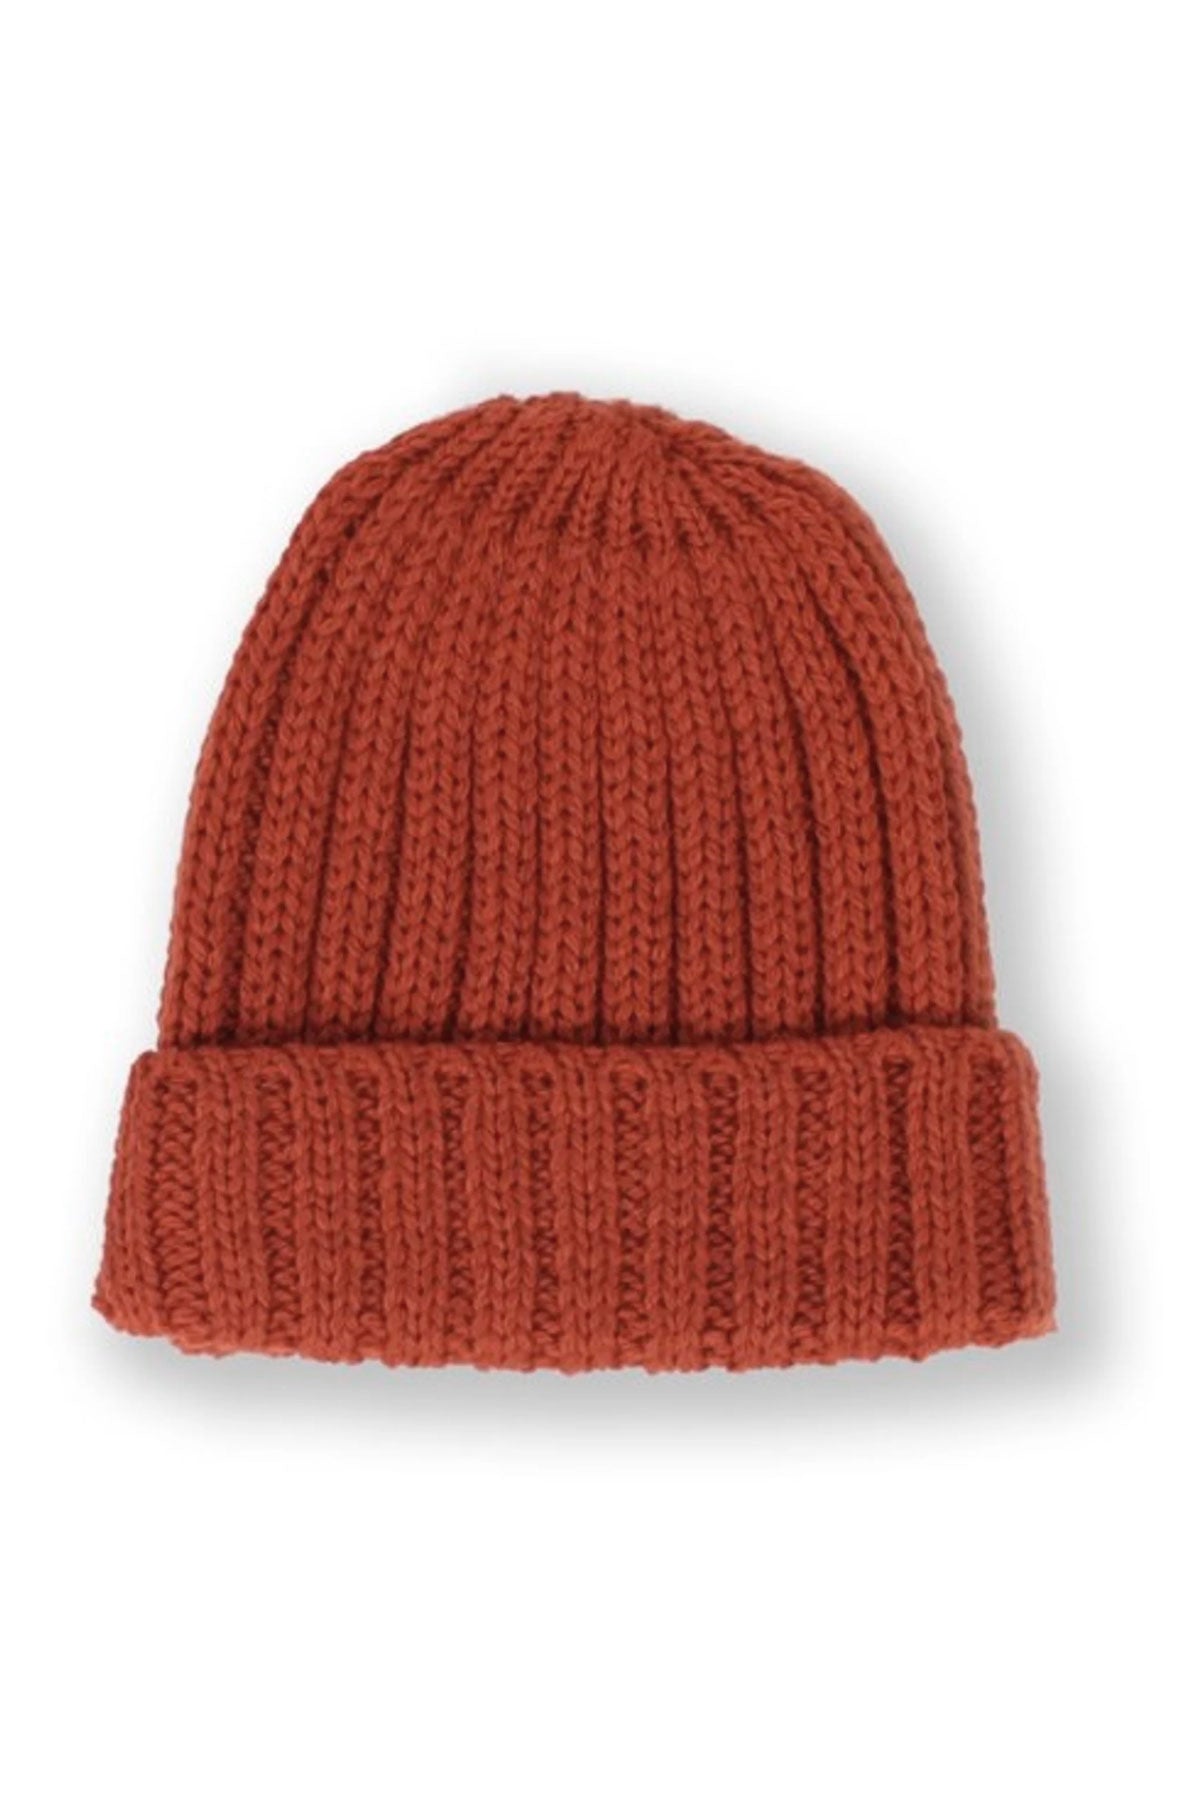 Peregrine - Ribbed Beanie in rust